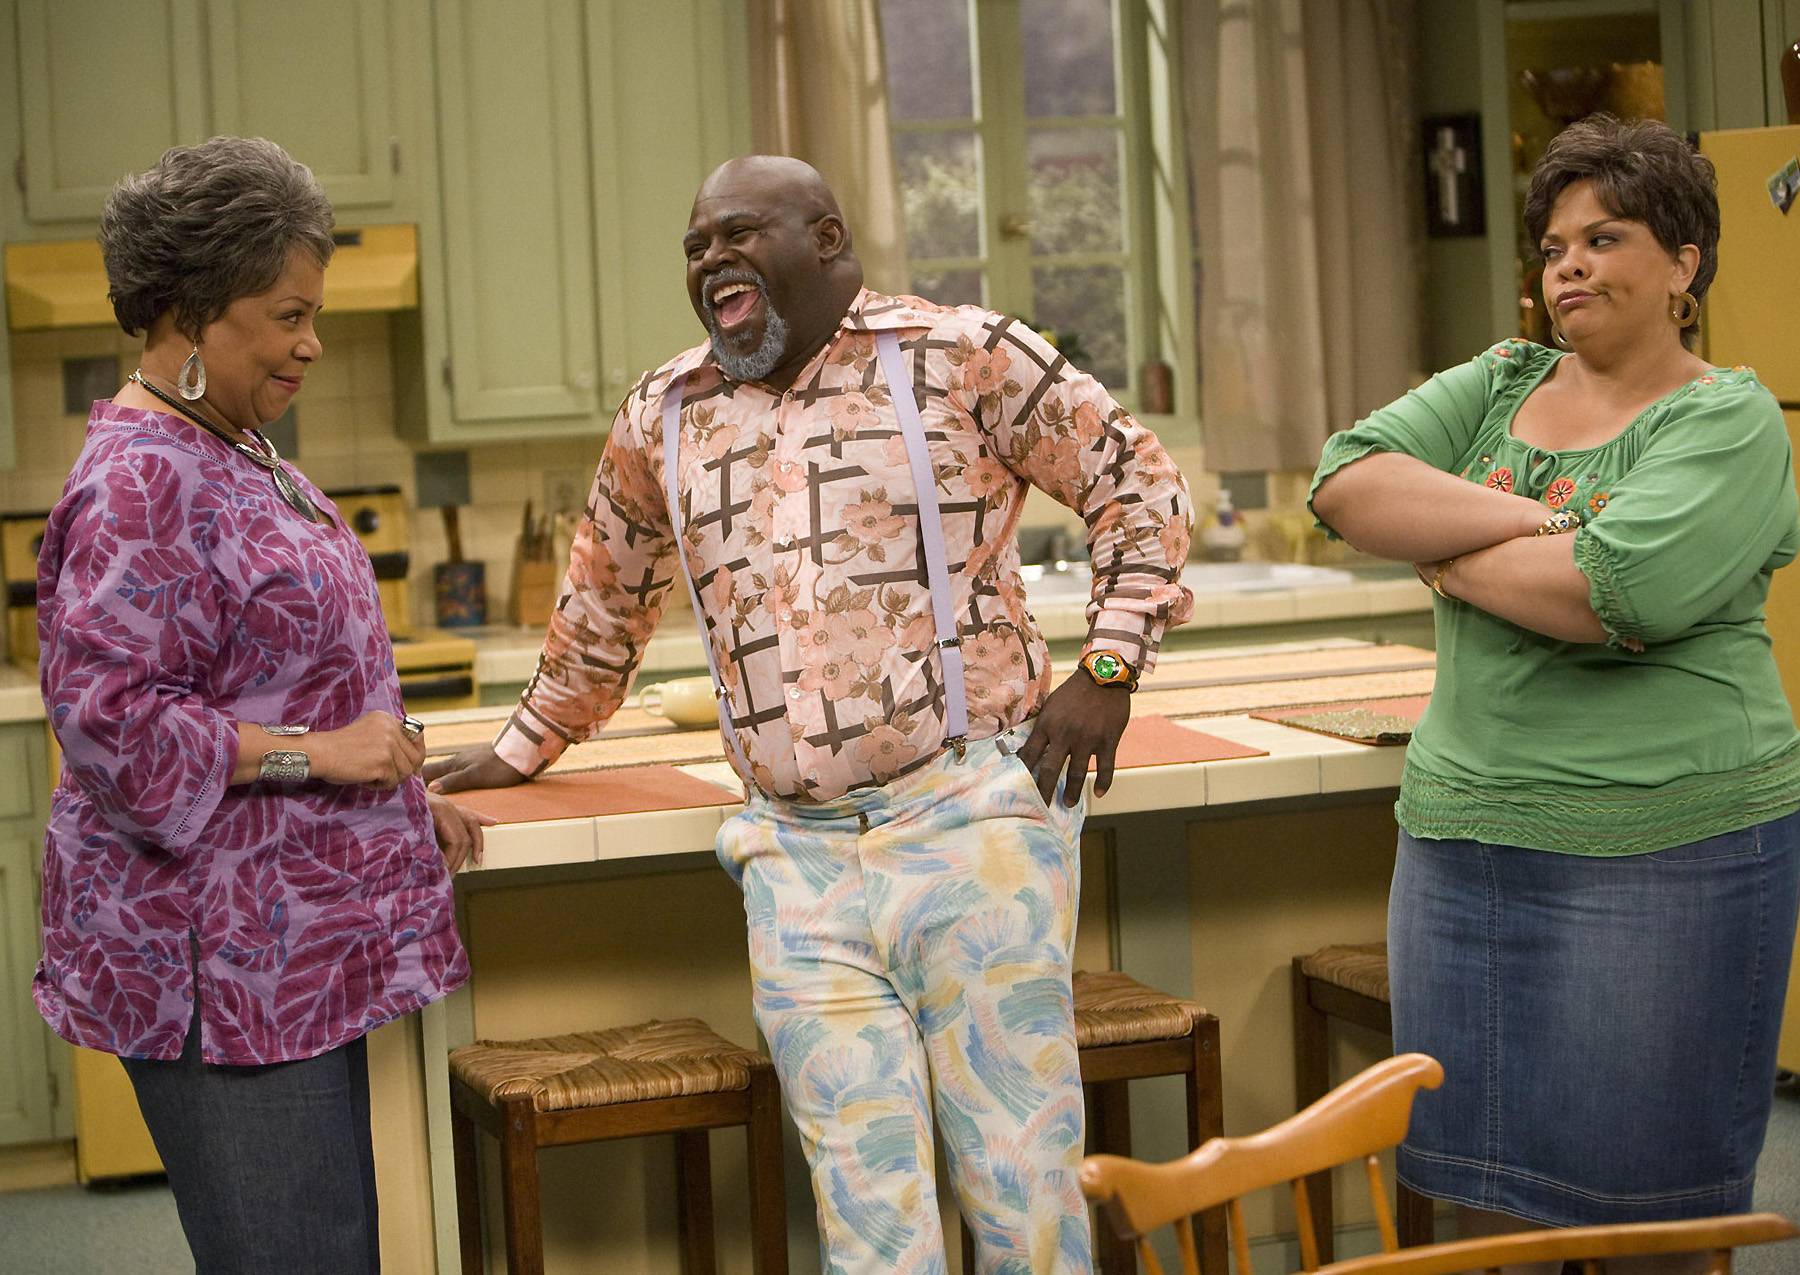 Meet the Browns - While Mann has sang background vocals for acts like Mary J. Blige and Yolanda Adams and appeared in countless stage plays, it was her role on TBS's Meet the Browns that saw the talented starlet enter America's homes and her character Cora evolve. (Photo: Lionsgate)